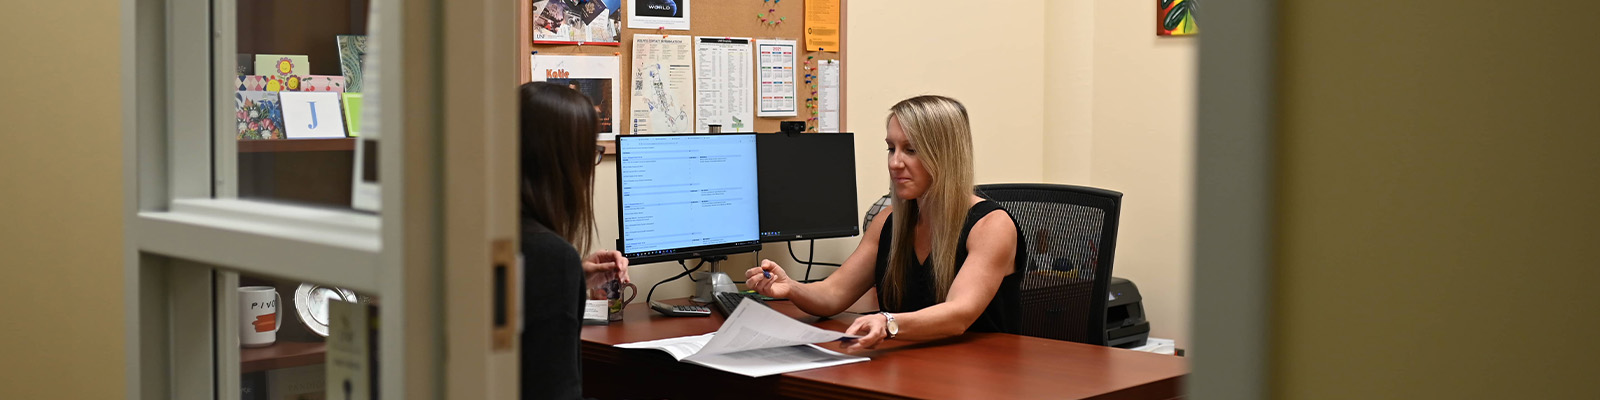 Advisor showcasing a brochure to a student in her office